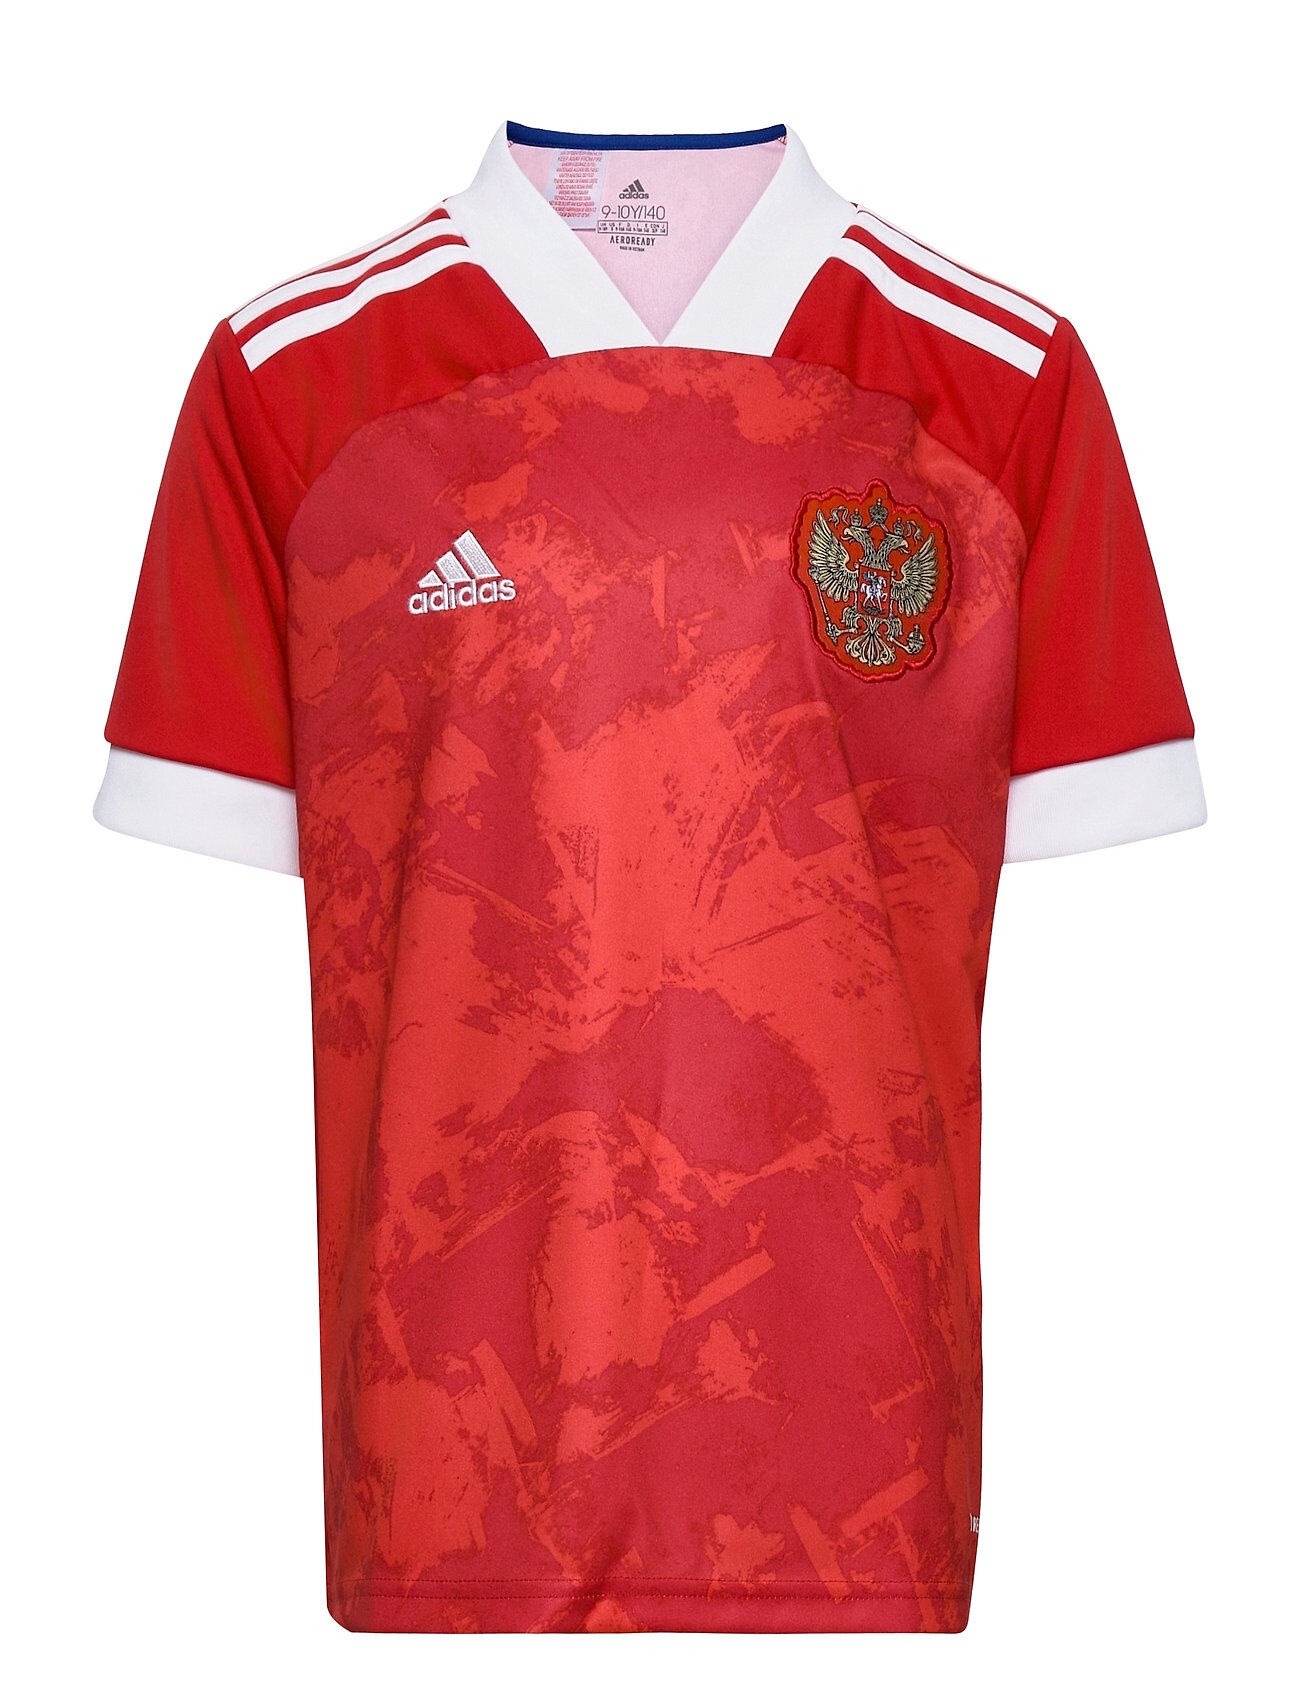 adidas Performance Russia 2020 Home Jersey T-shirts Football Shirts Rød Adidas Performance